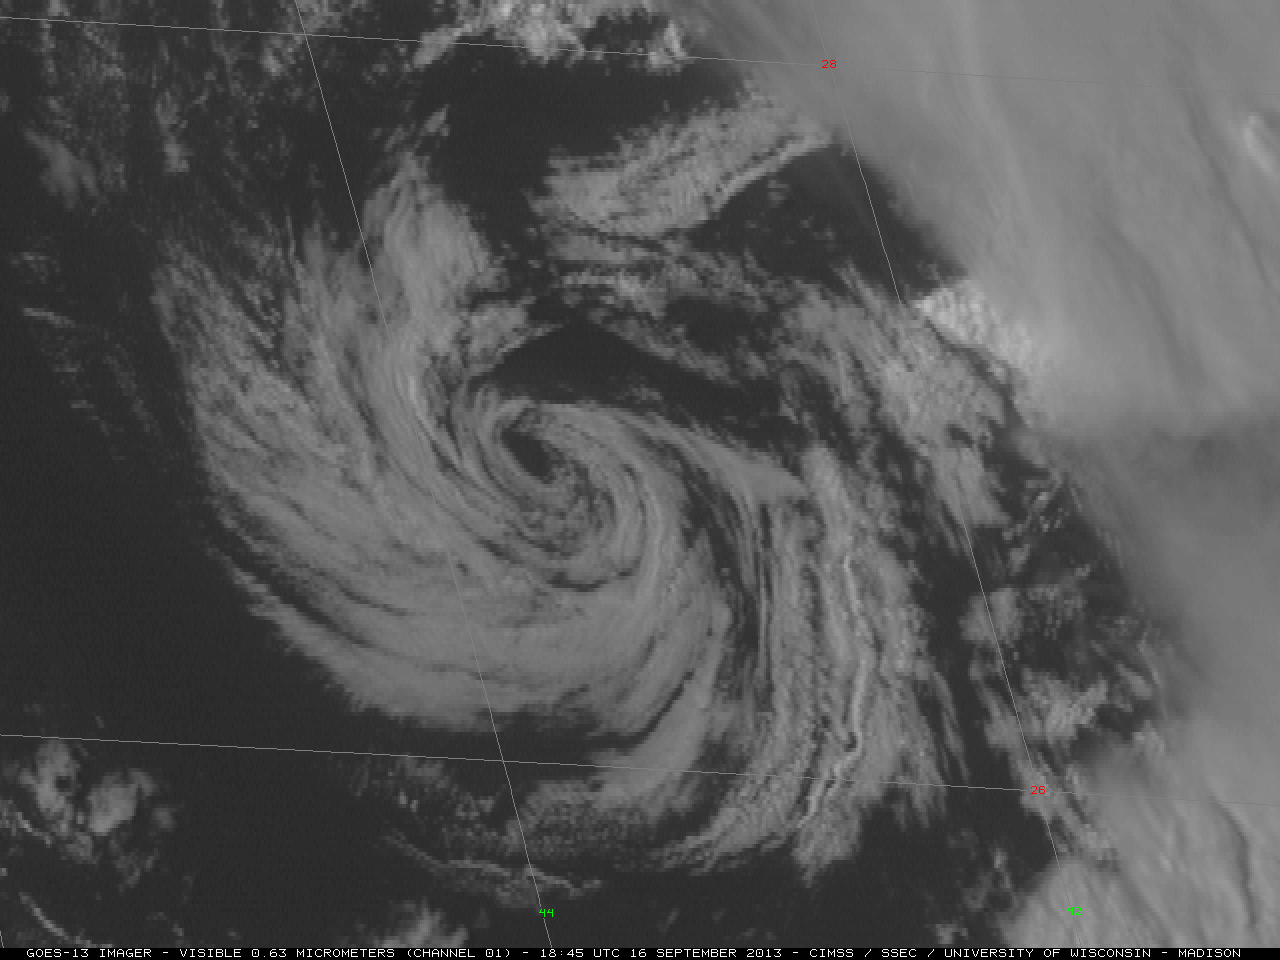 GOES-13 0.63 Âµm visible channel images (click images to play animation)